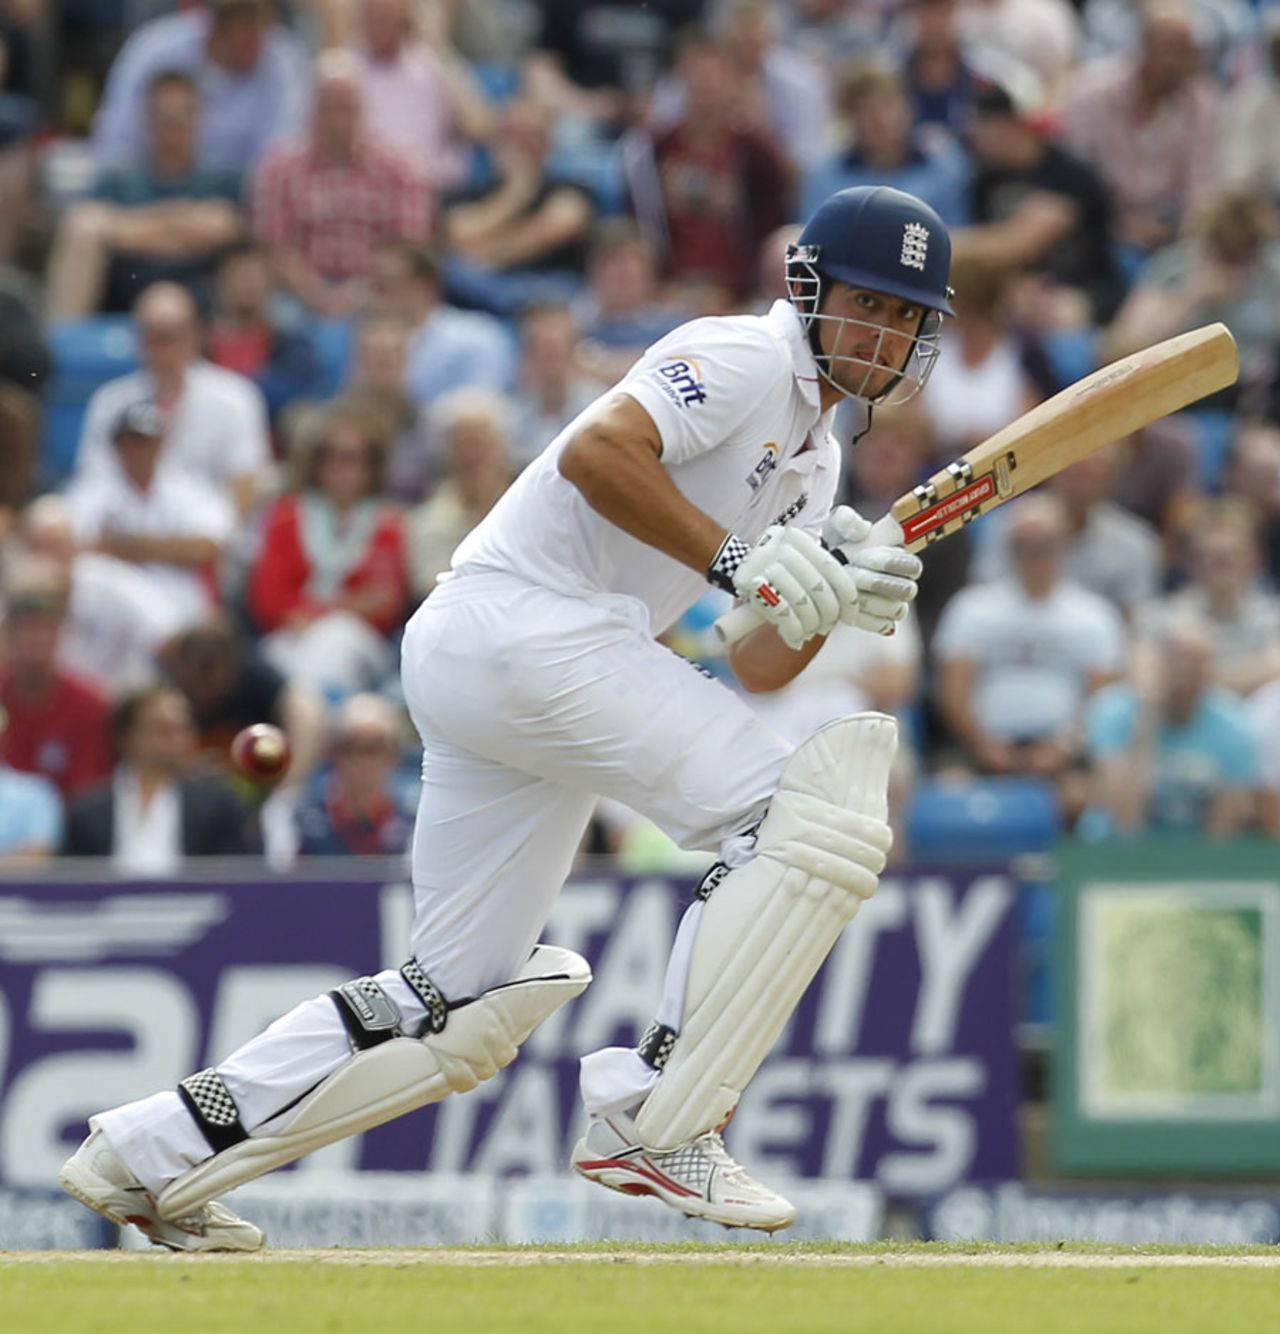 Alastair Cook plays into the leg side at the start of England's reply, 2nd Investec Test, Headingley, 2nd day, August 3, 2012